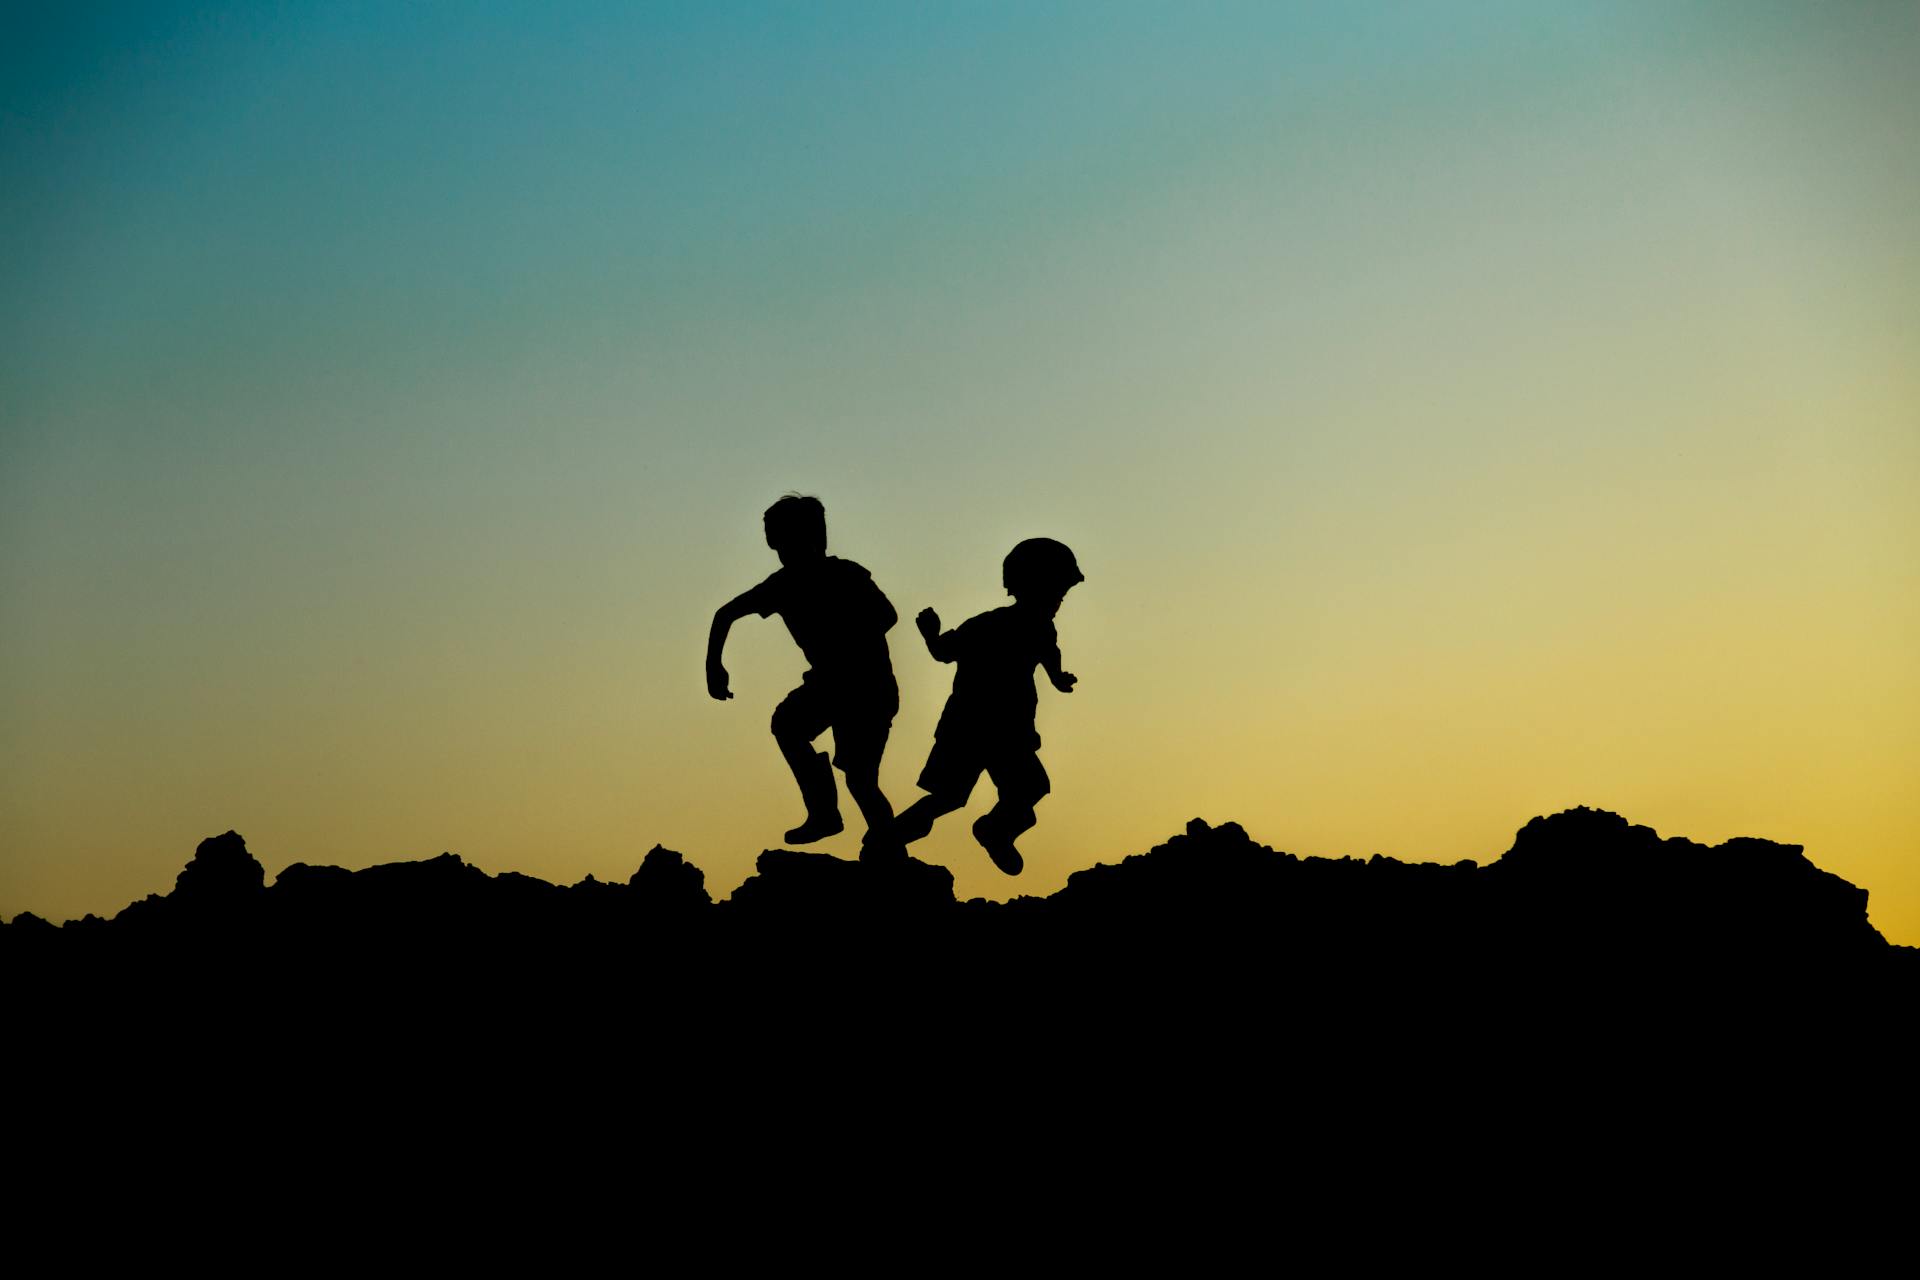 Blog Post Image: Pexels [Silhouette Photo of Jumping Children, photo by Margaret Weir, Sept. 22, 2017, CC0]